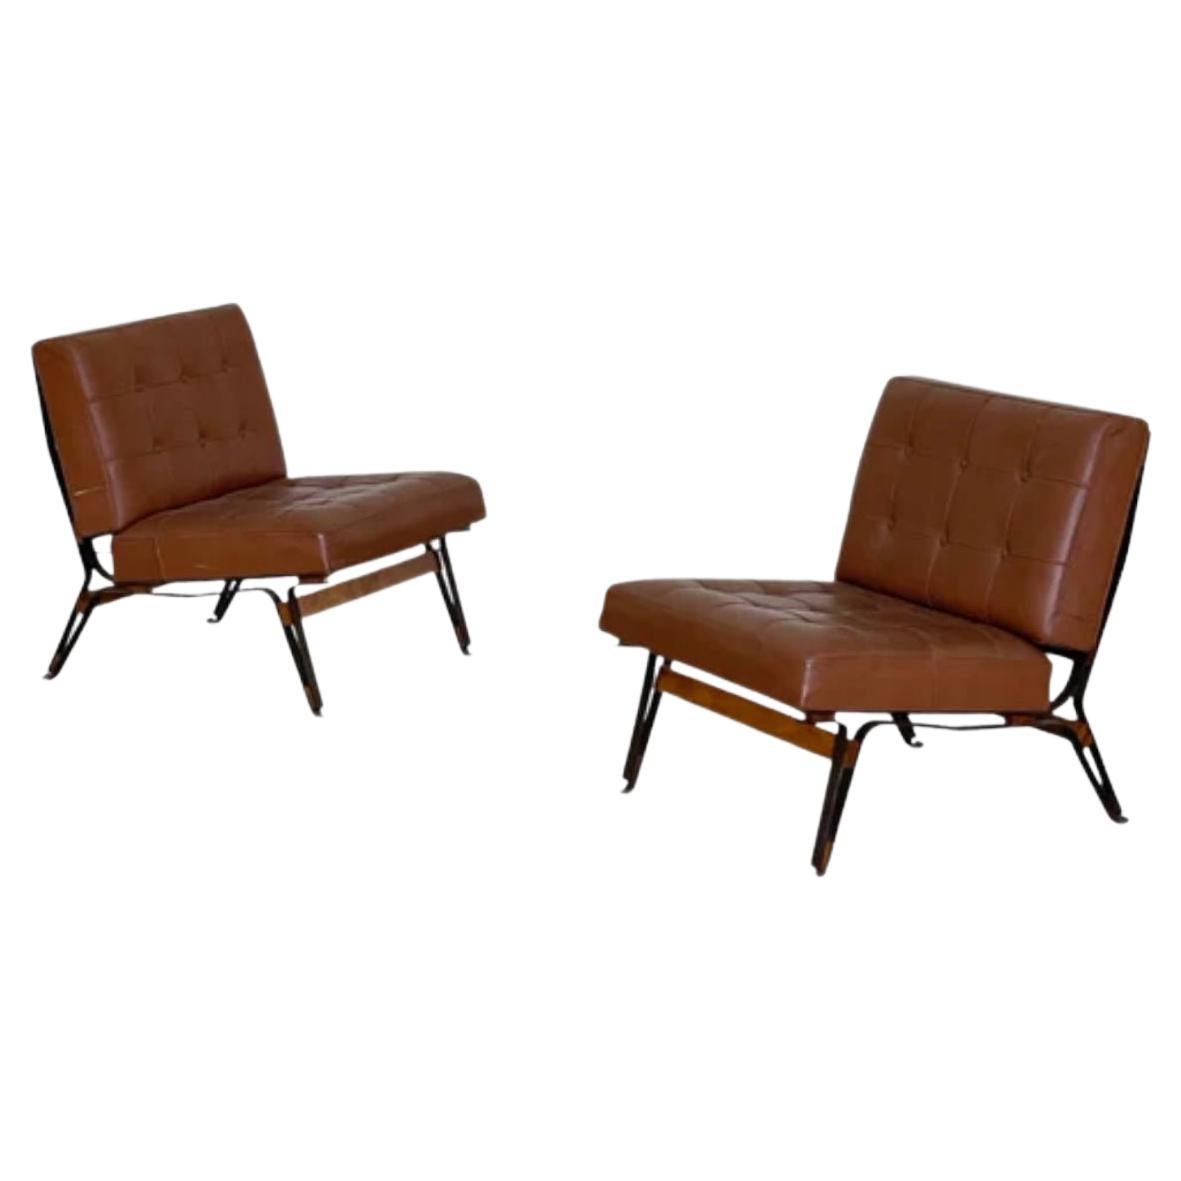 Model 856 Rare Pair of Matched Leather Lounge Chairs by Ico Parisi, 1950s For Sale